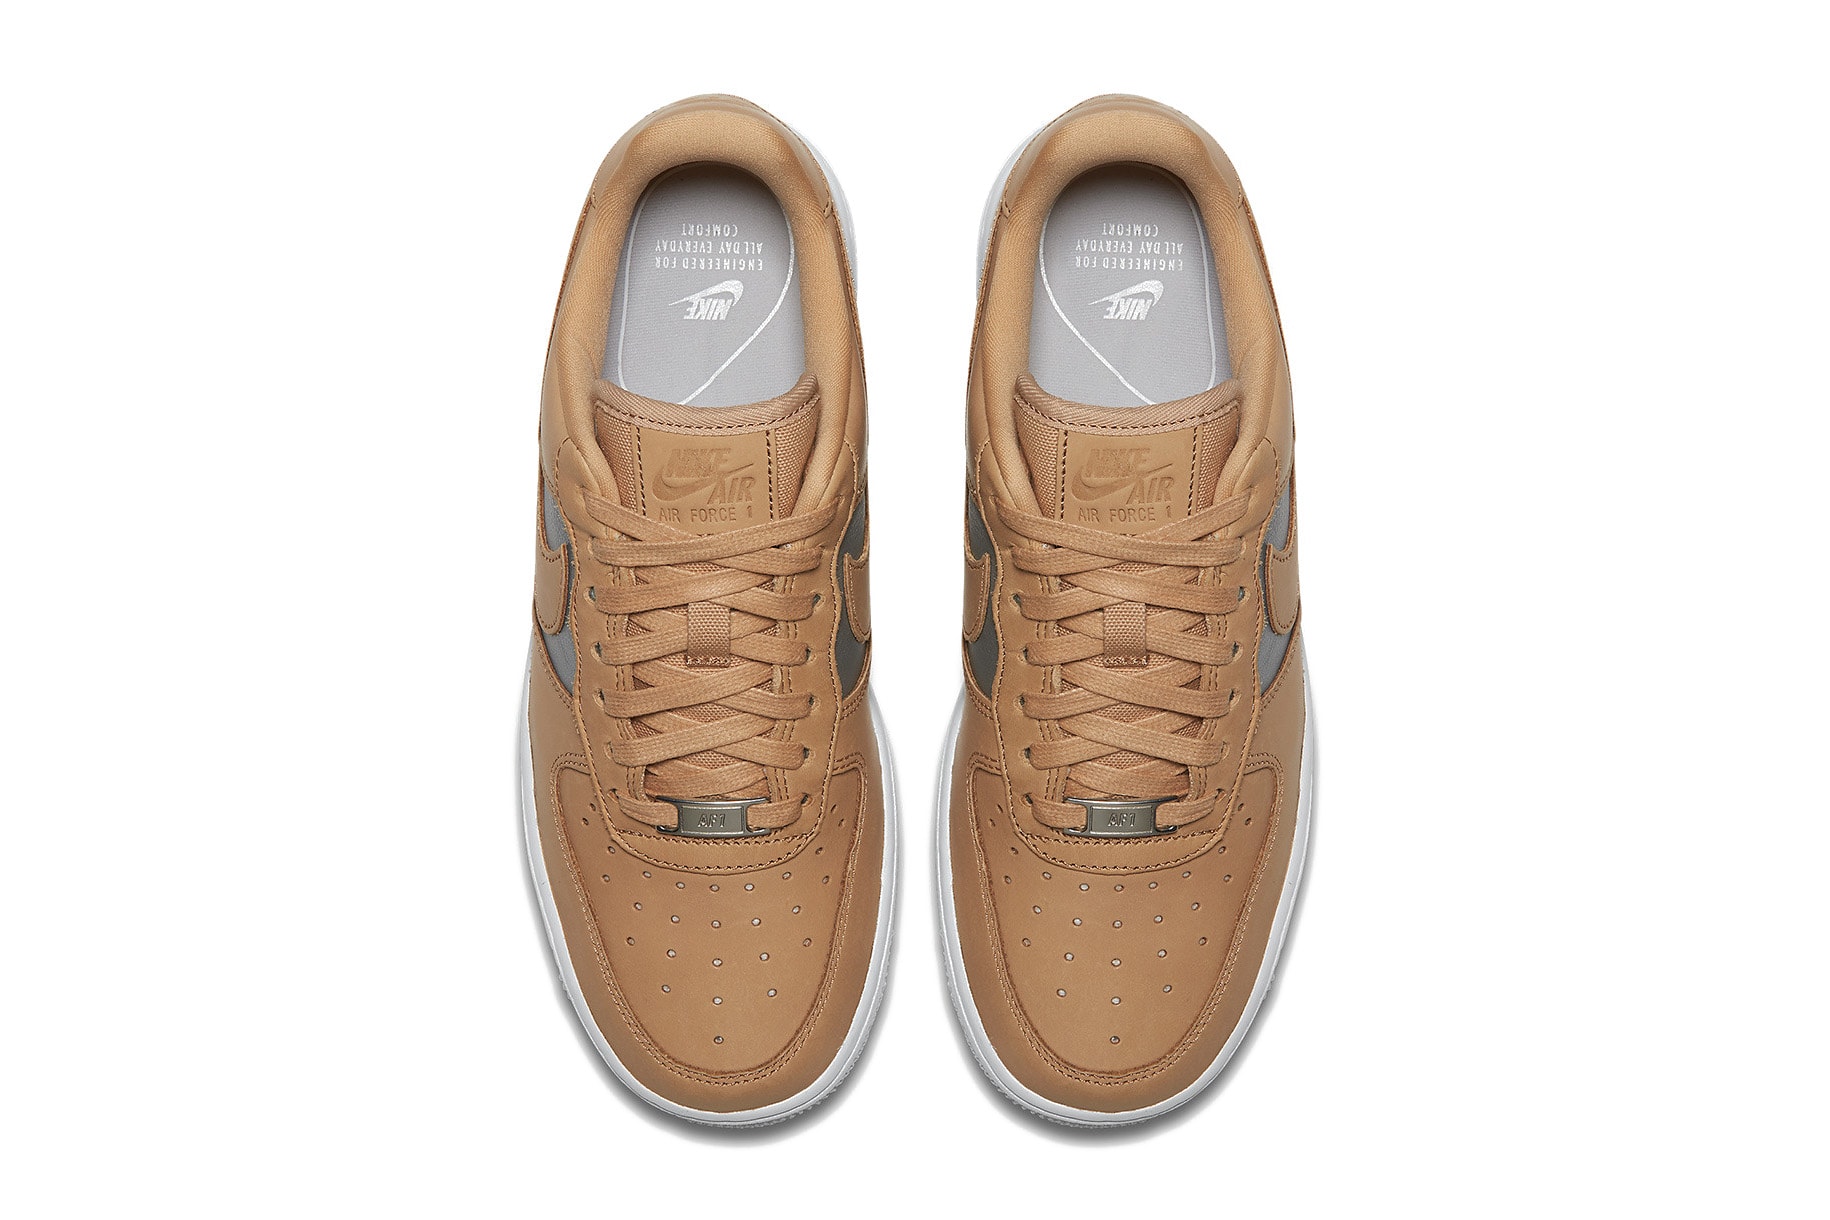 Nike Air Force 1 and Blazer Low in "Tan Silver" Sneaker Silhouette